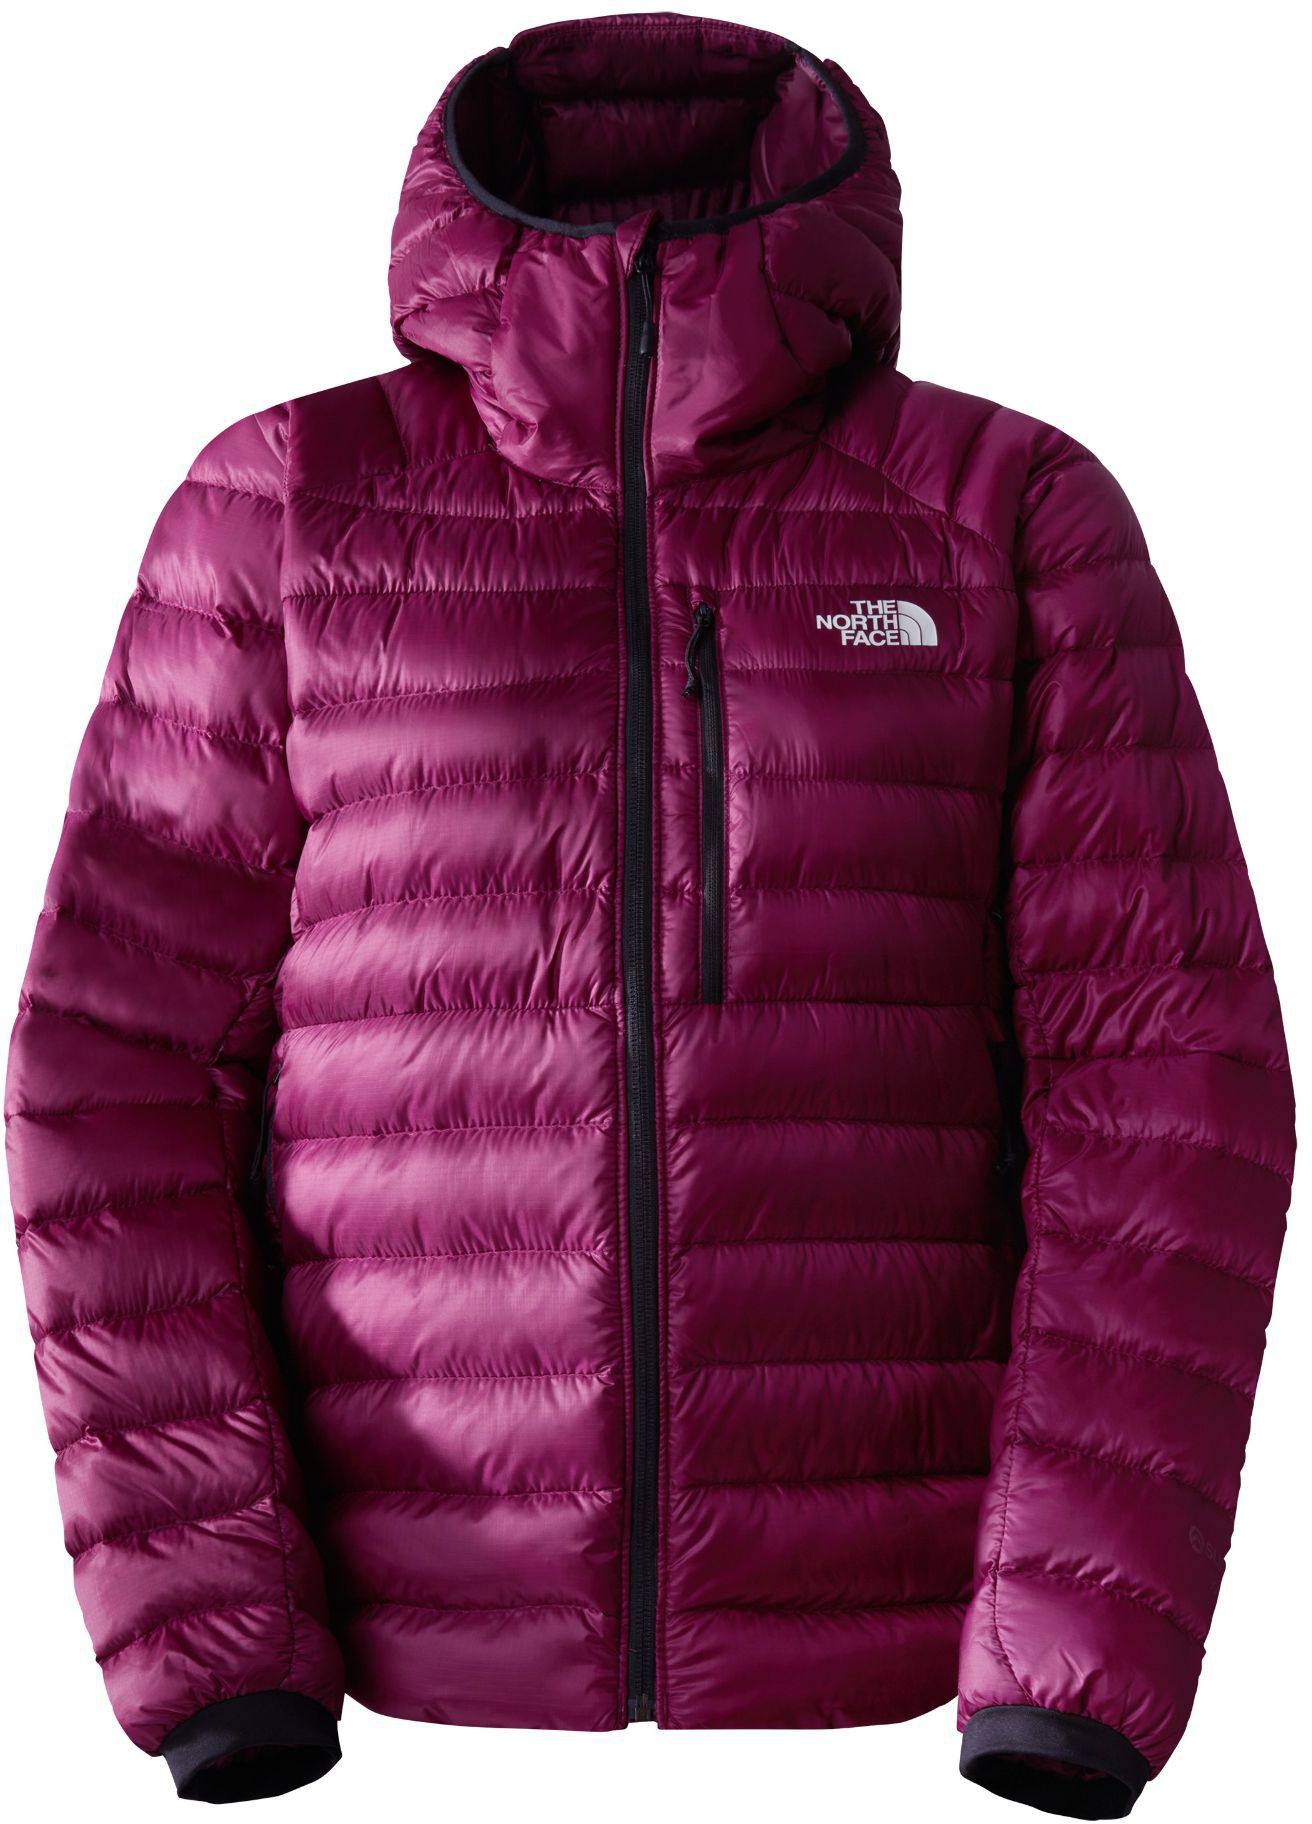 The North Face Women’s Breithorn Hoodie